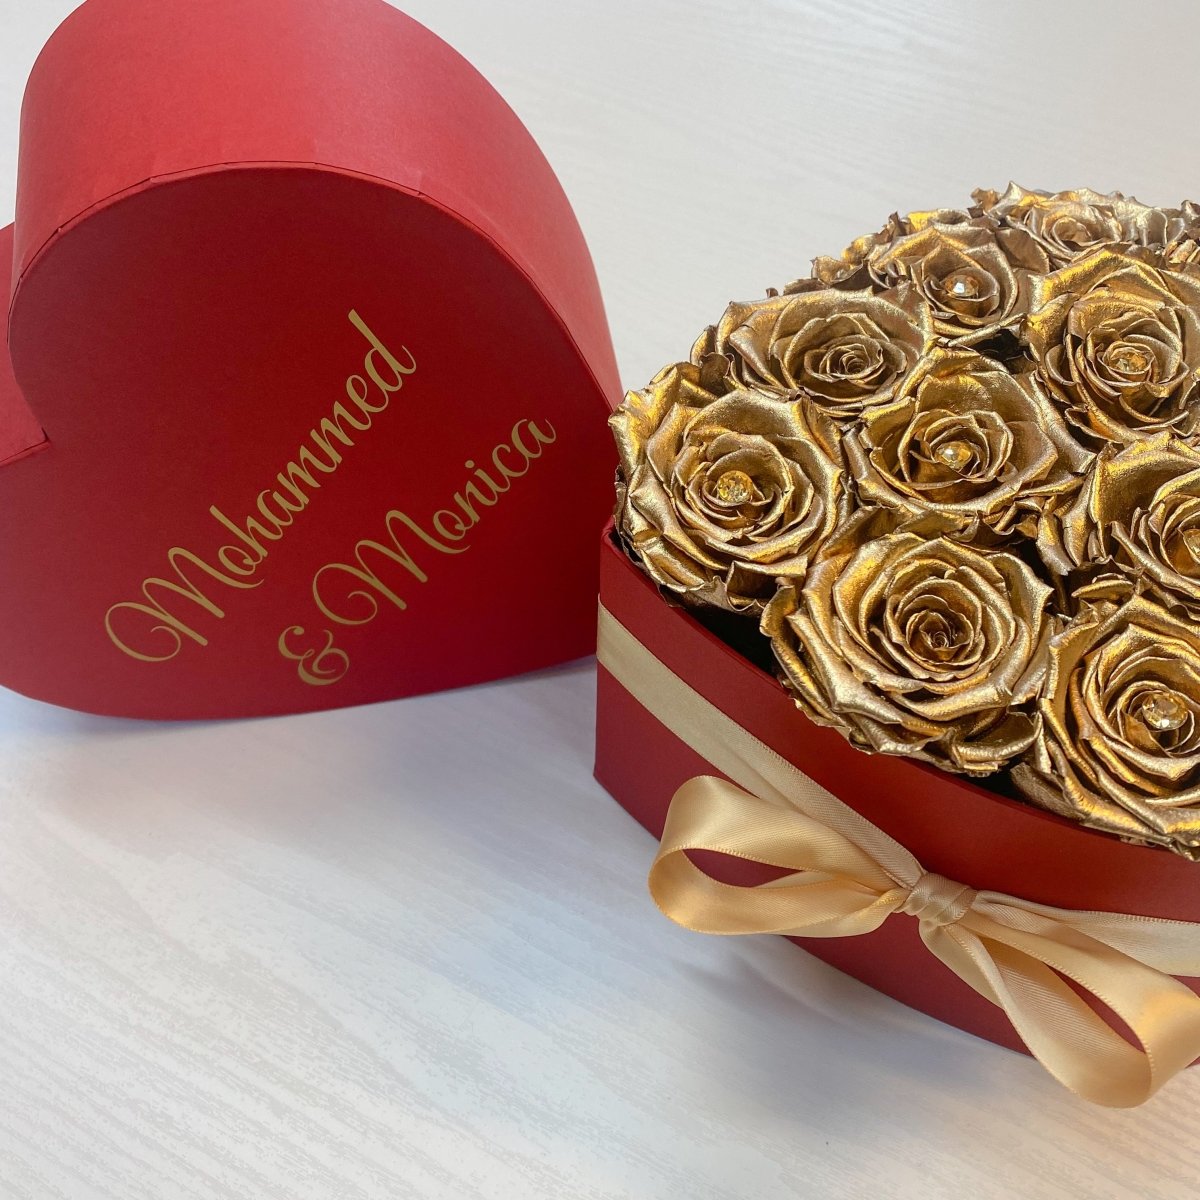 Infinity Rose Heart Box - Gold Infinity Roses - One Year Roses - Romantic Gift - Rose Colours divider-Glamorous Gold